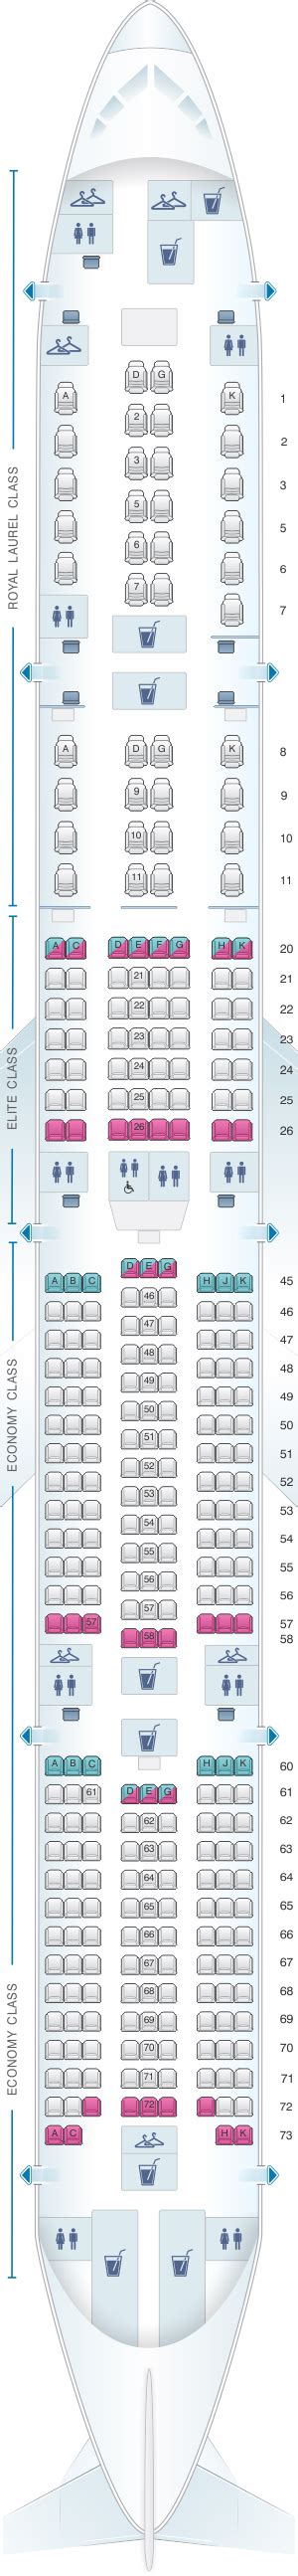 The Premium Laurel Class cabin, with its 2-2-2 seating arrangement, is breathtakingly huge. State-of-the-art hard-shell seats recline to an almost flat position without cramping passengers in front or behind. A generous 61–62-inch seat pitch is made even more comfortable with fully adjustable headrests and footrests, electrically controlled ... . 